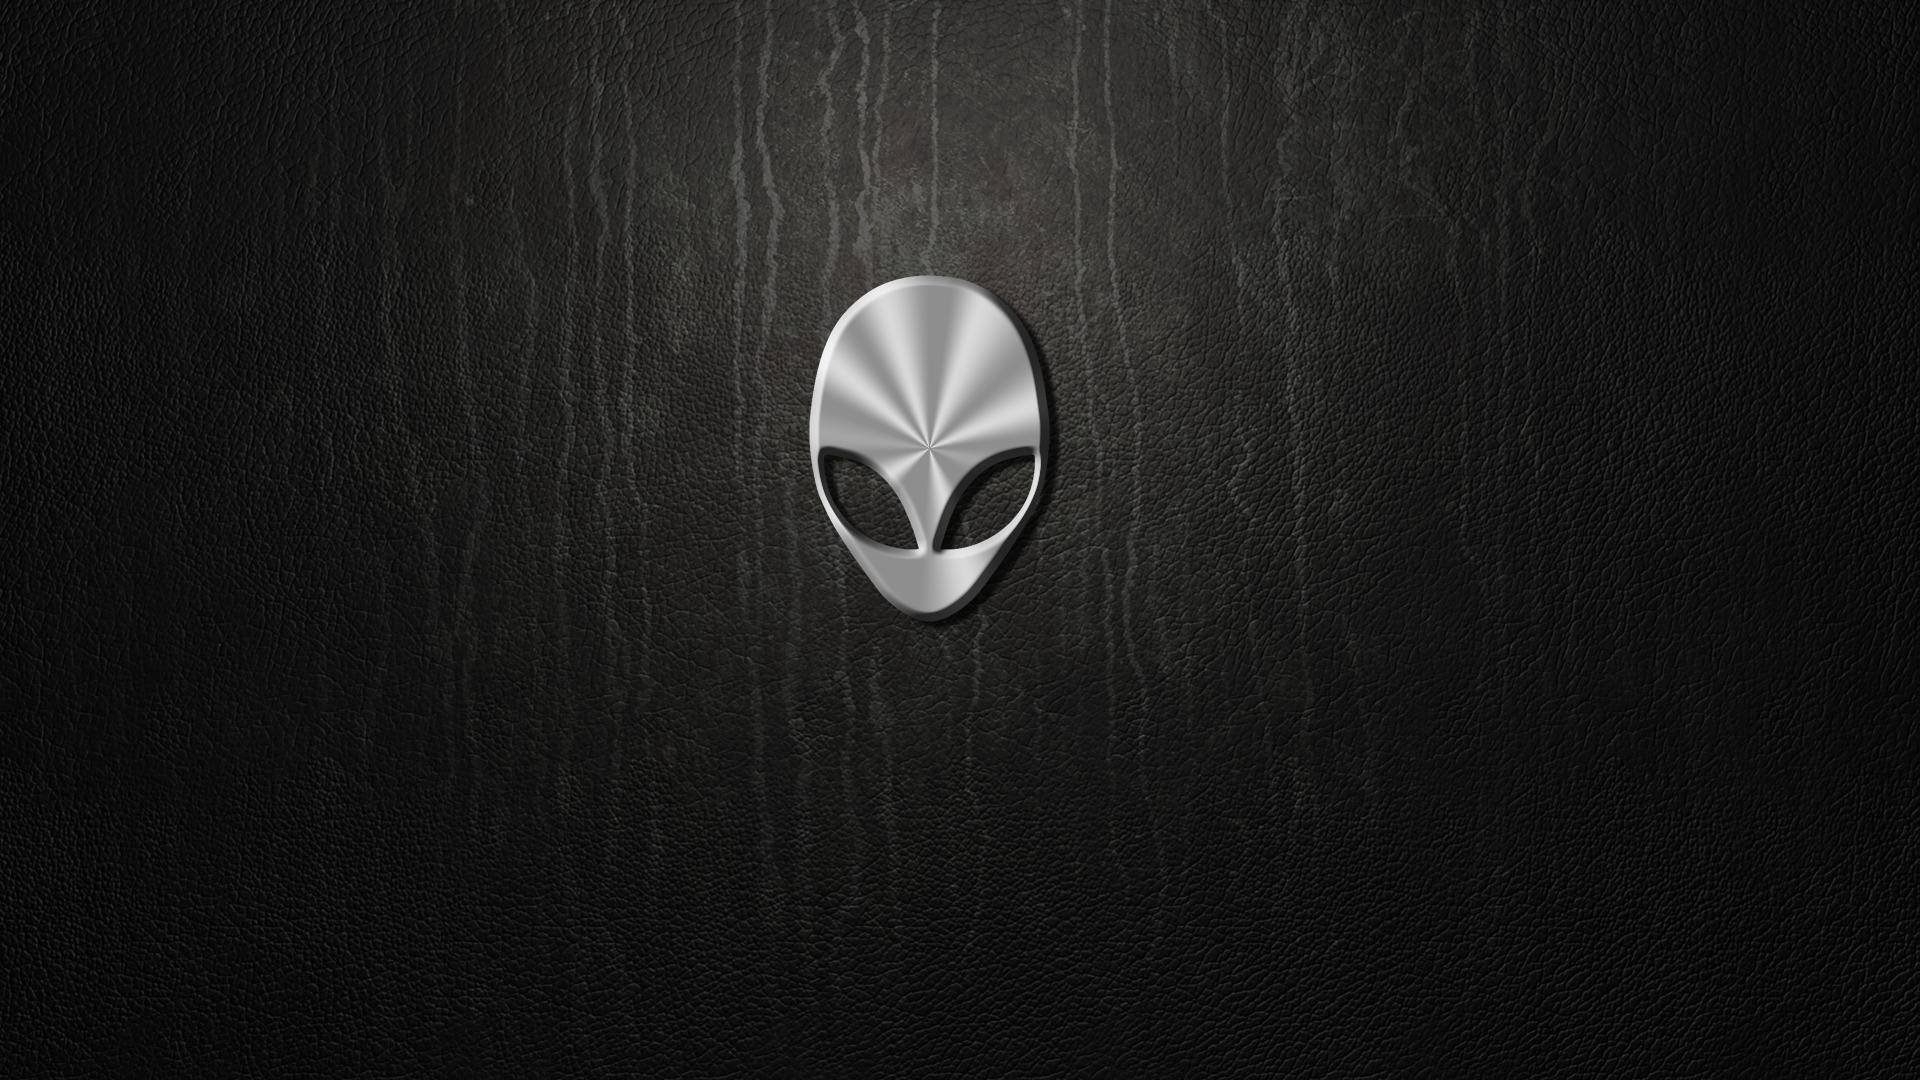 Boost your gaming performance with Alienware. Wallpaper